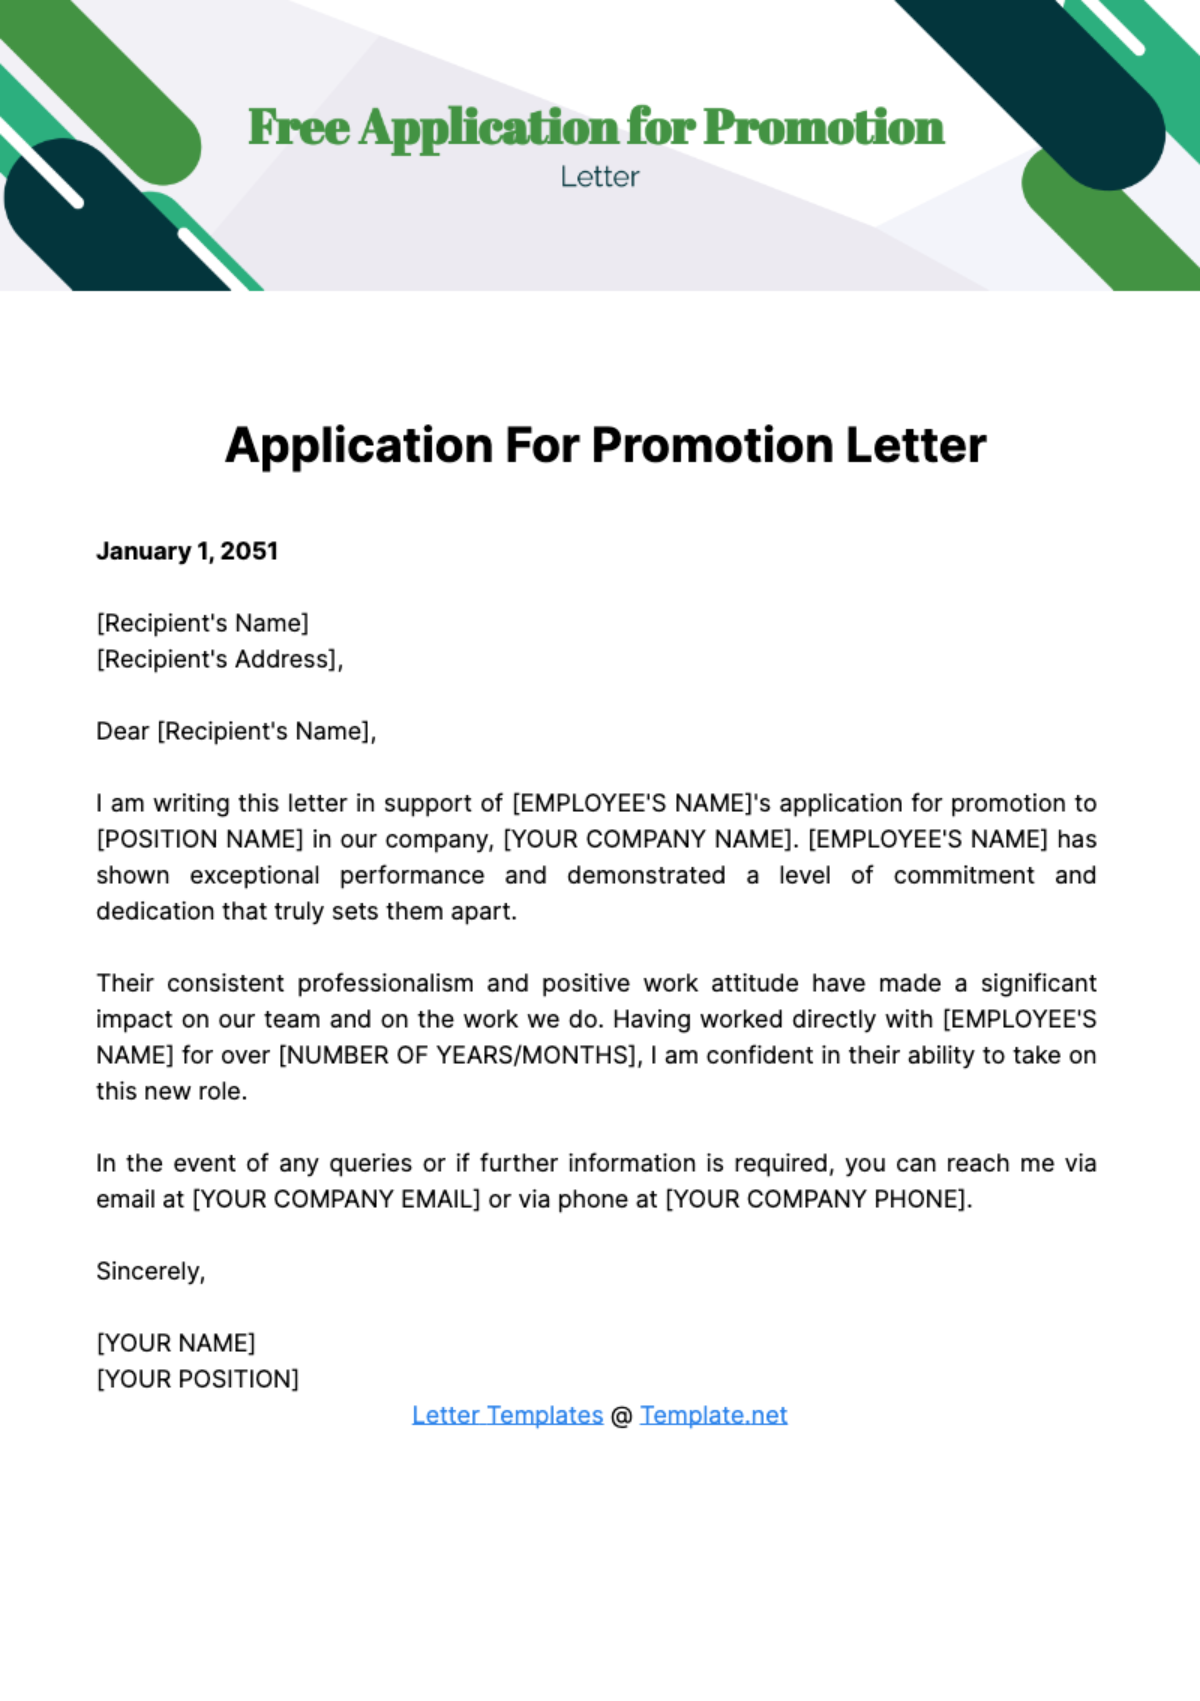 Application for Promotion Letter Template